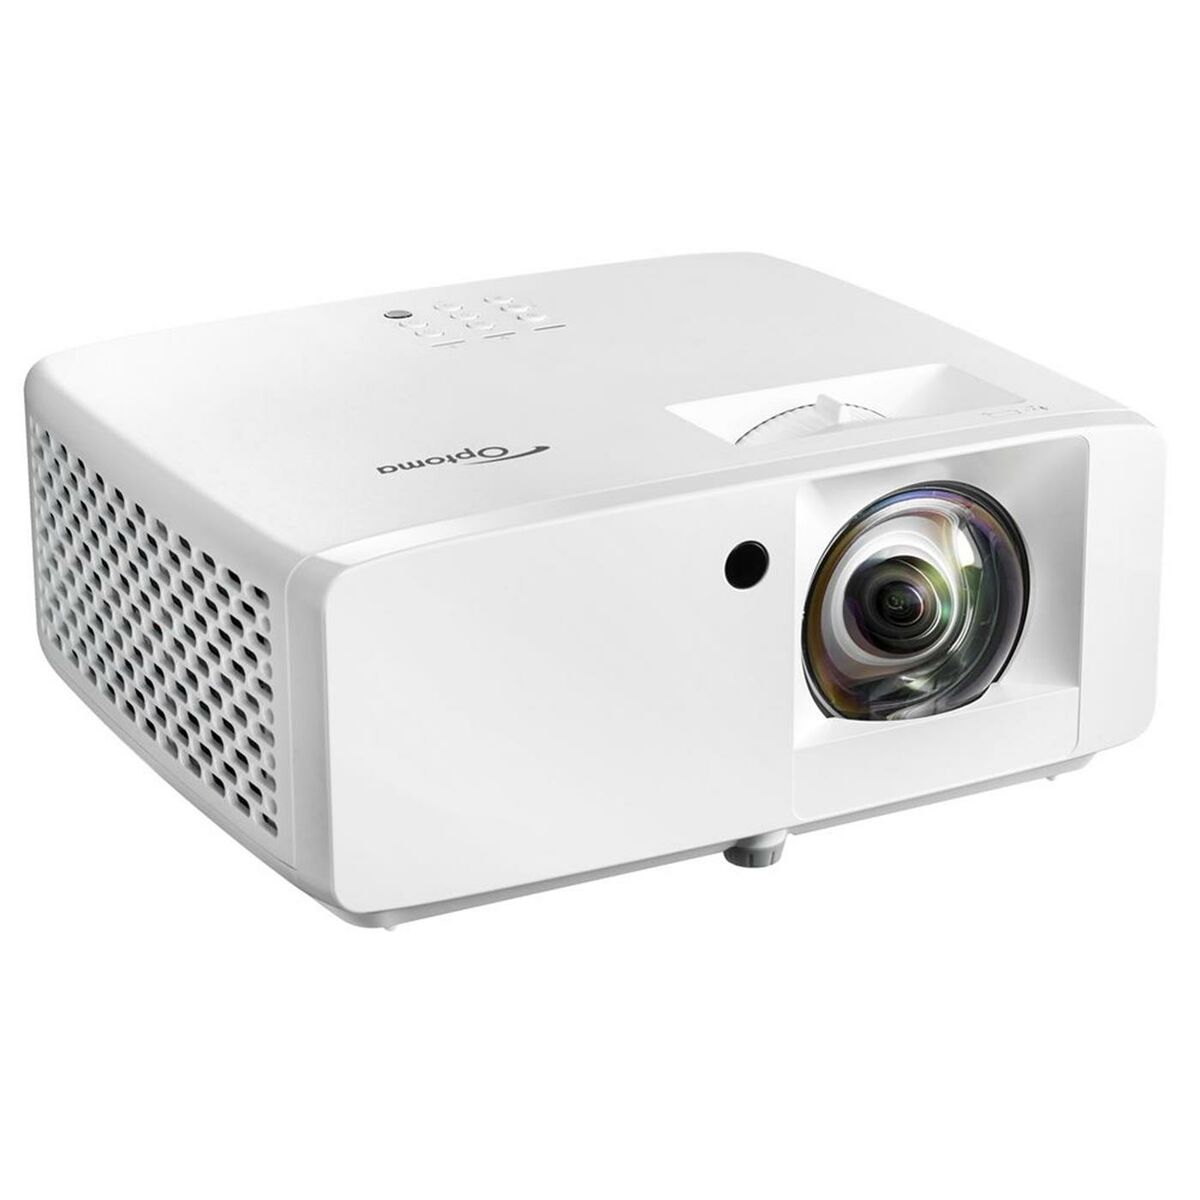 Projector Optoma ZH350ST 3500 lm 1920 x 1080 px, Optoma, Electronics, TV, Video and home cinema, projector-optoma-zh350st-3500-lm-1920-x-1080-px, Brand_Optoma, category-reference-2609, category-reference-2642, category-reference-2947, category-reference-t-18805, category-reference-t-19653, cinema and television, computers / peripherals, Condition_NEW, entertainment, office, Price_+ 1000, RiotNook